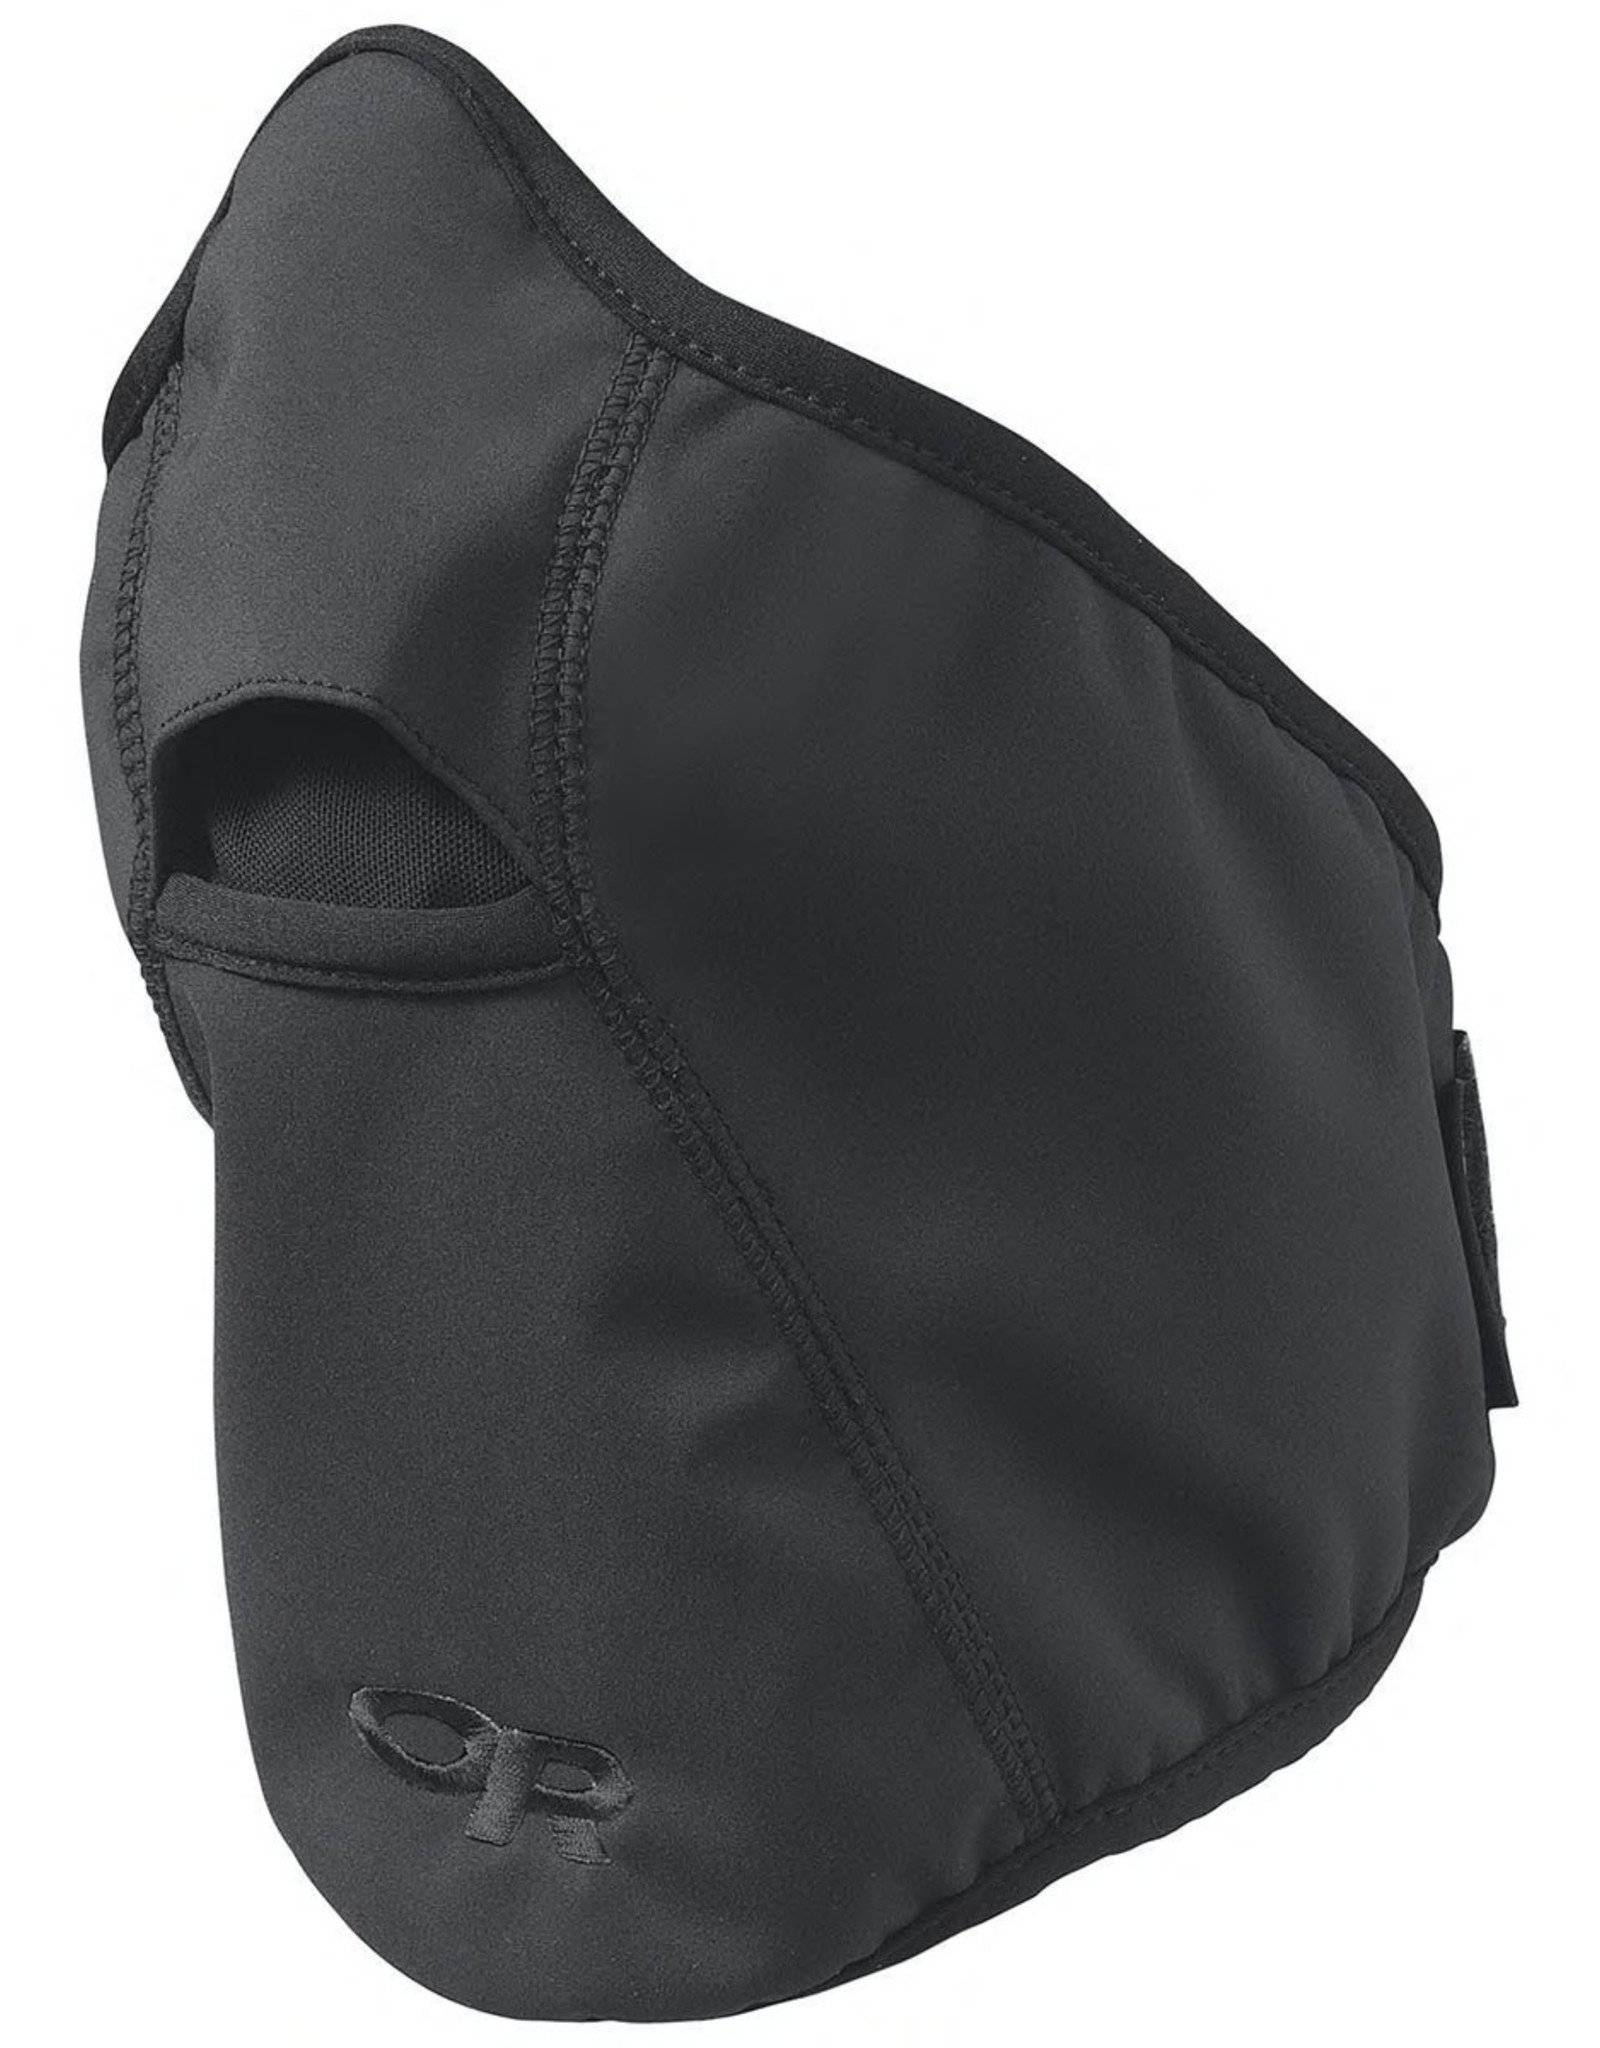 Outdoor Research Stormtracker Face Mask